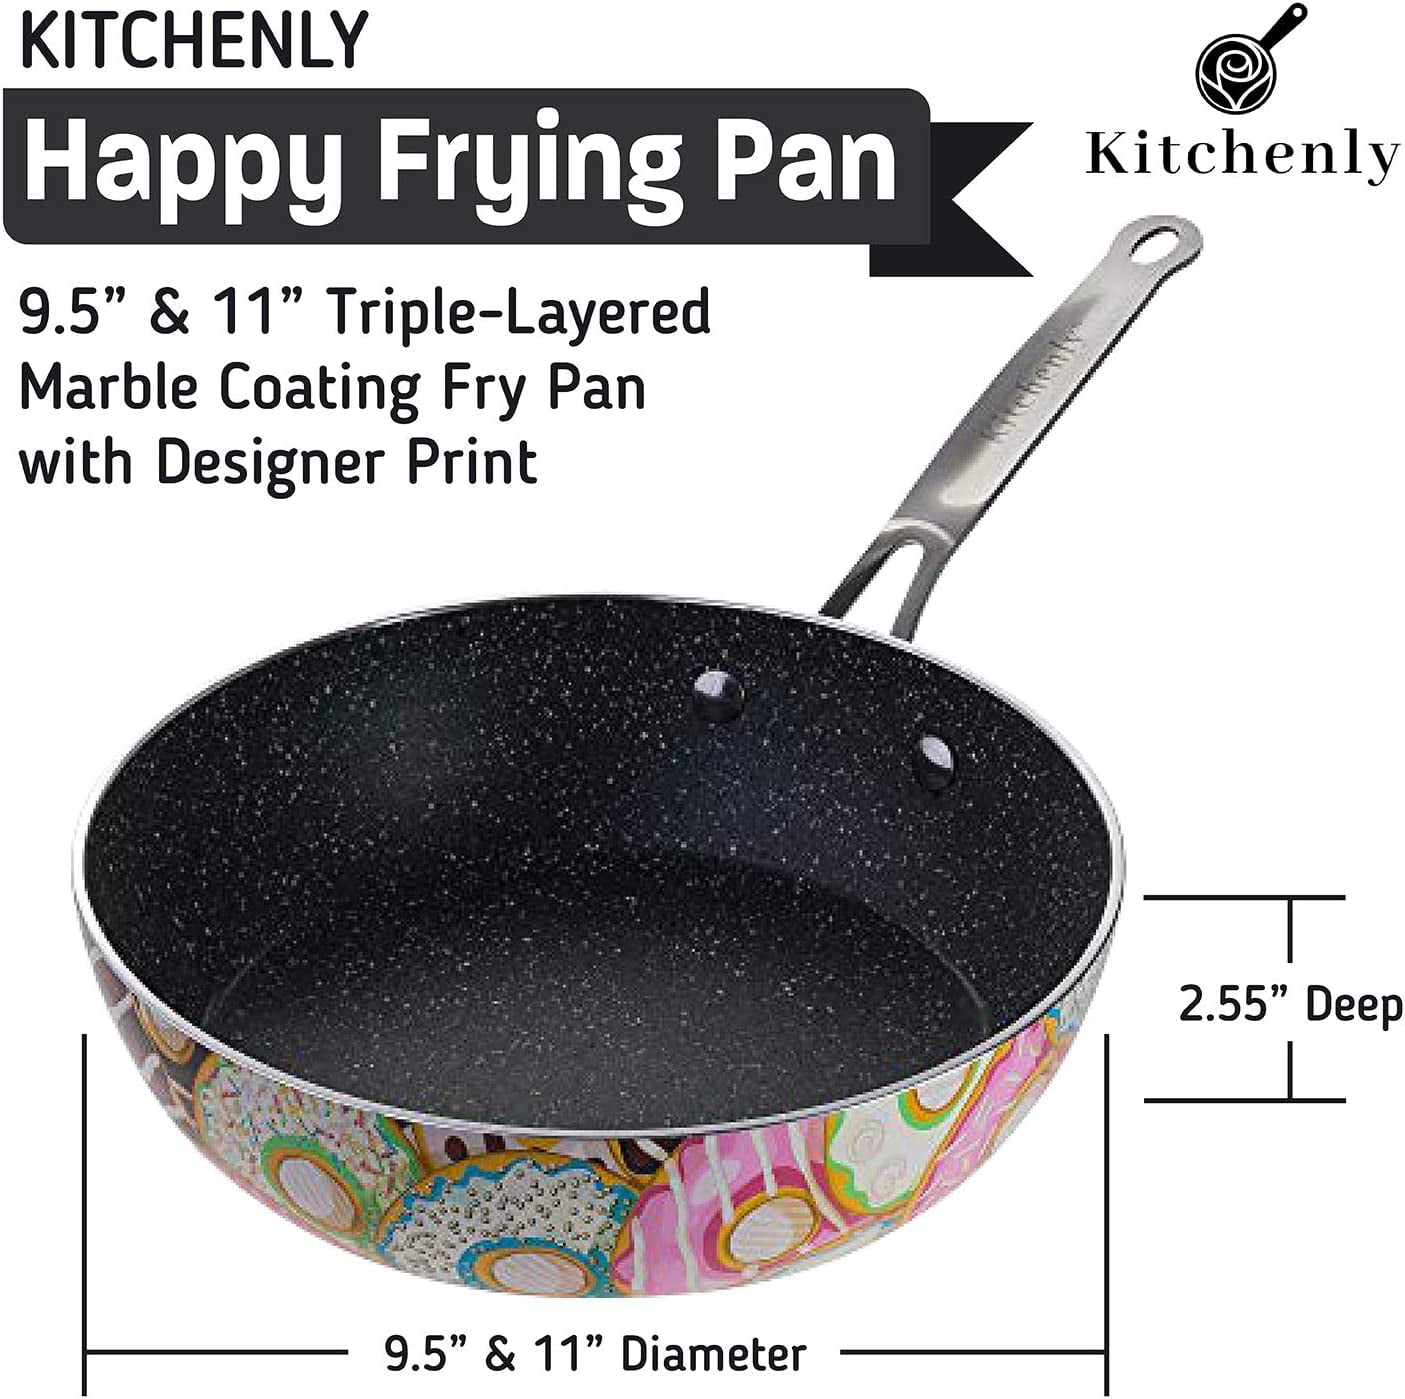 Mr. Handy Marble Coated Frying Pan w/ Colorful Handle - 11 (Pieces=12 –  Mr. Handy Shop